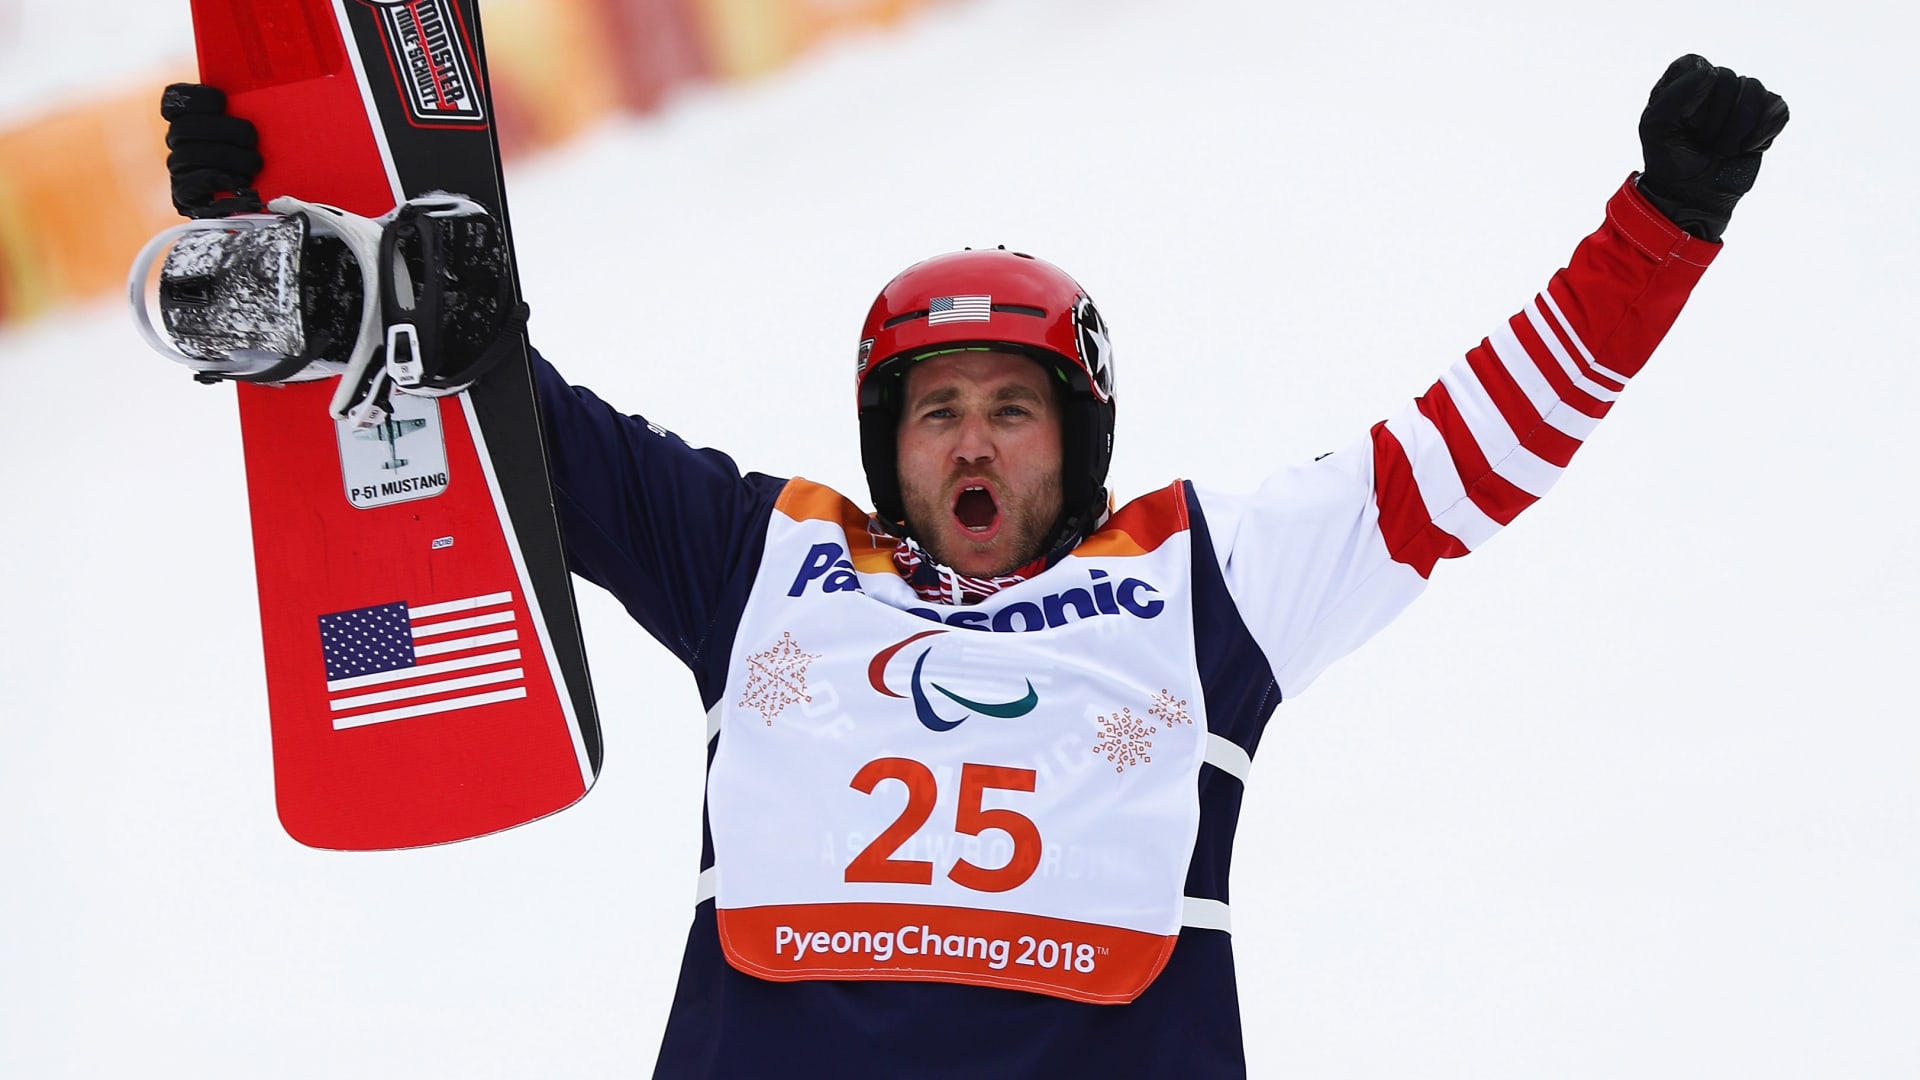 Snowboarder Mike Schultz of the United States celebrates during the victory ceremony for the Men's Snowboard Banked Slalom SB-LL1 at the PyeongChang 2018 Paralympic Games.